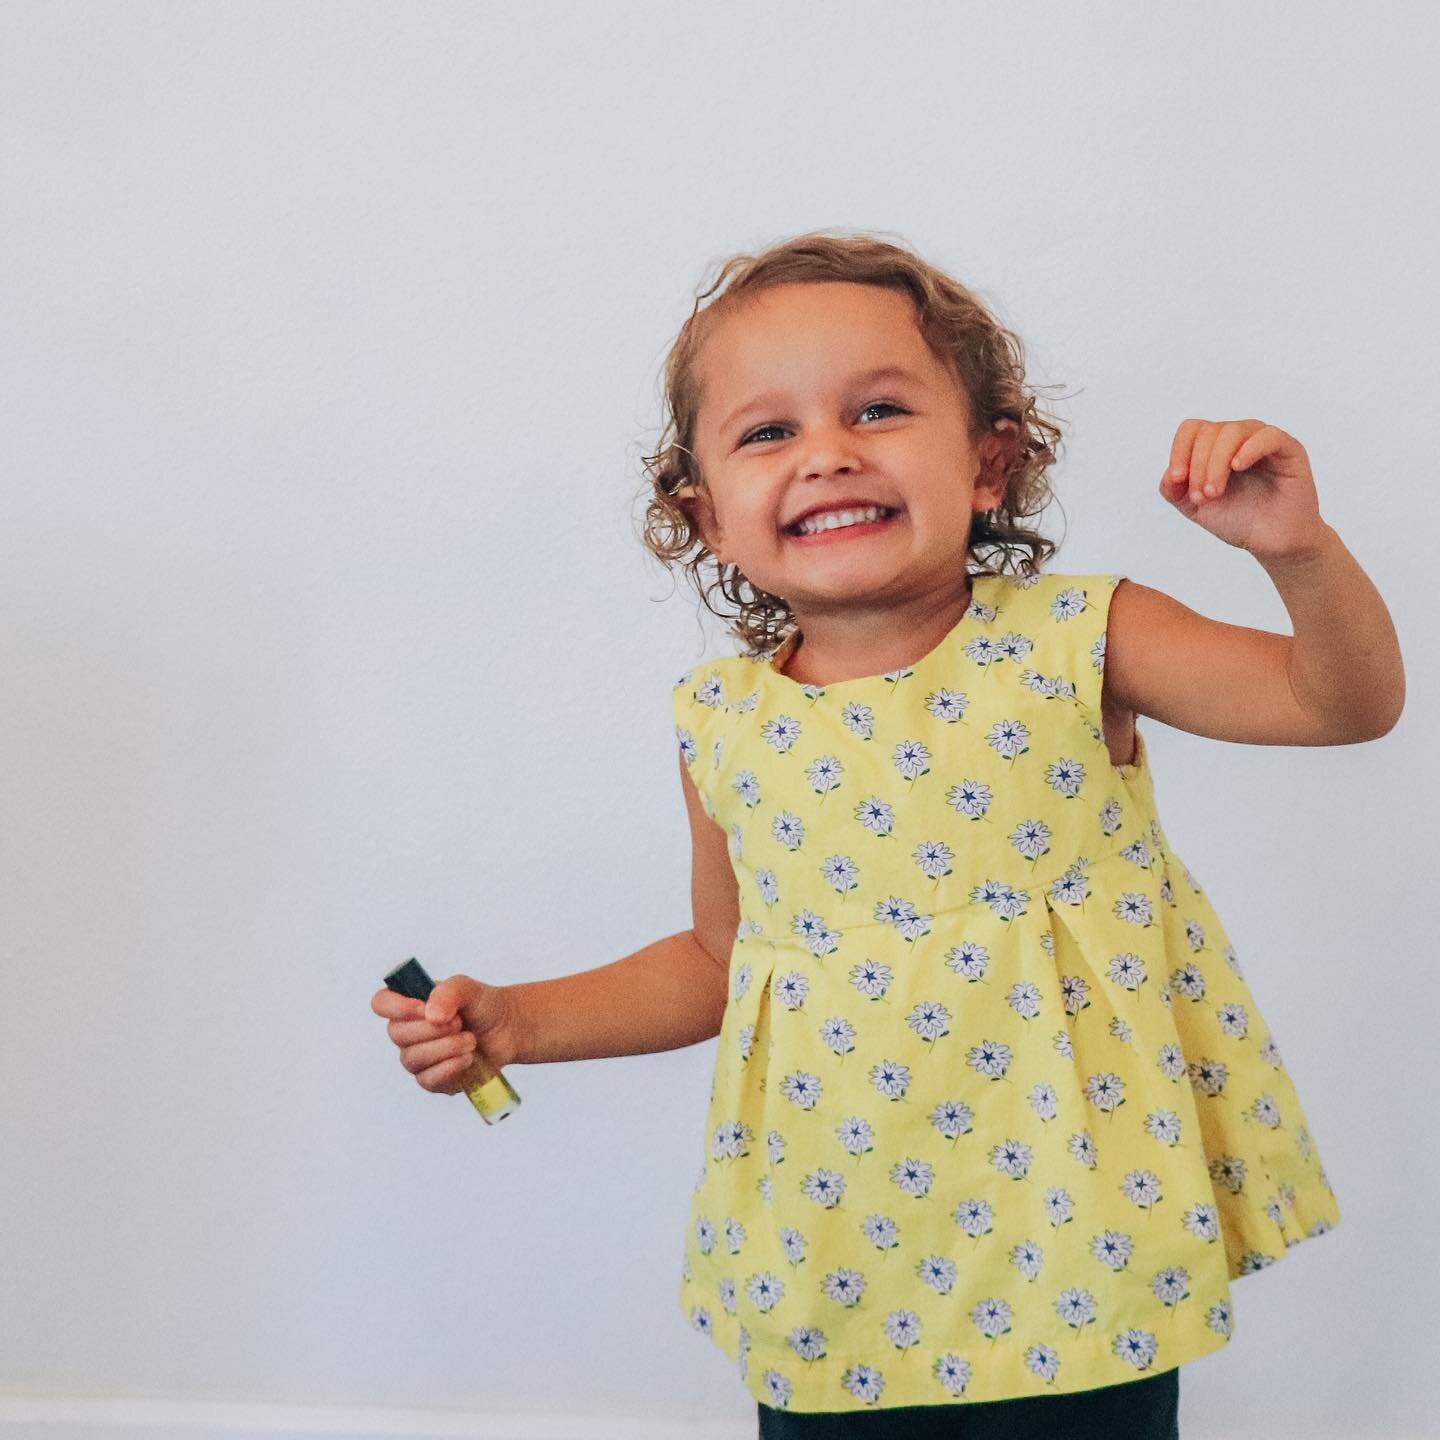 So full of life and joy, but a little extra happiness never hurts 🤗 Aubs is gleefully showing off our new Kid-Safe Be Happy roller! What&rsquo;s Kid-Safe? It means this roller features a bit lower percentage of essential oils and only contains oils 